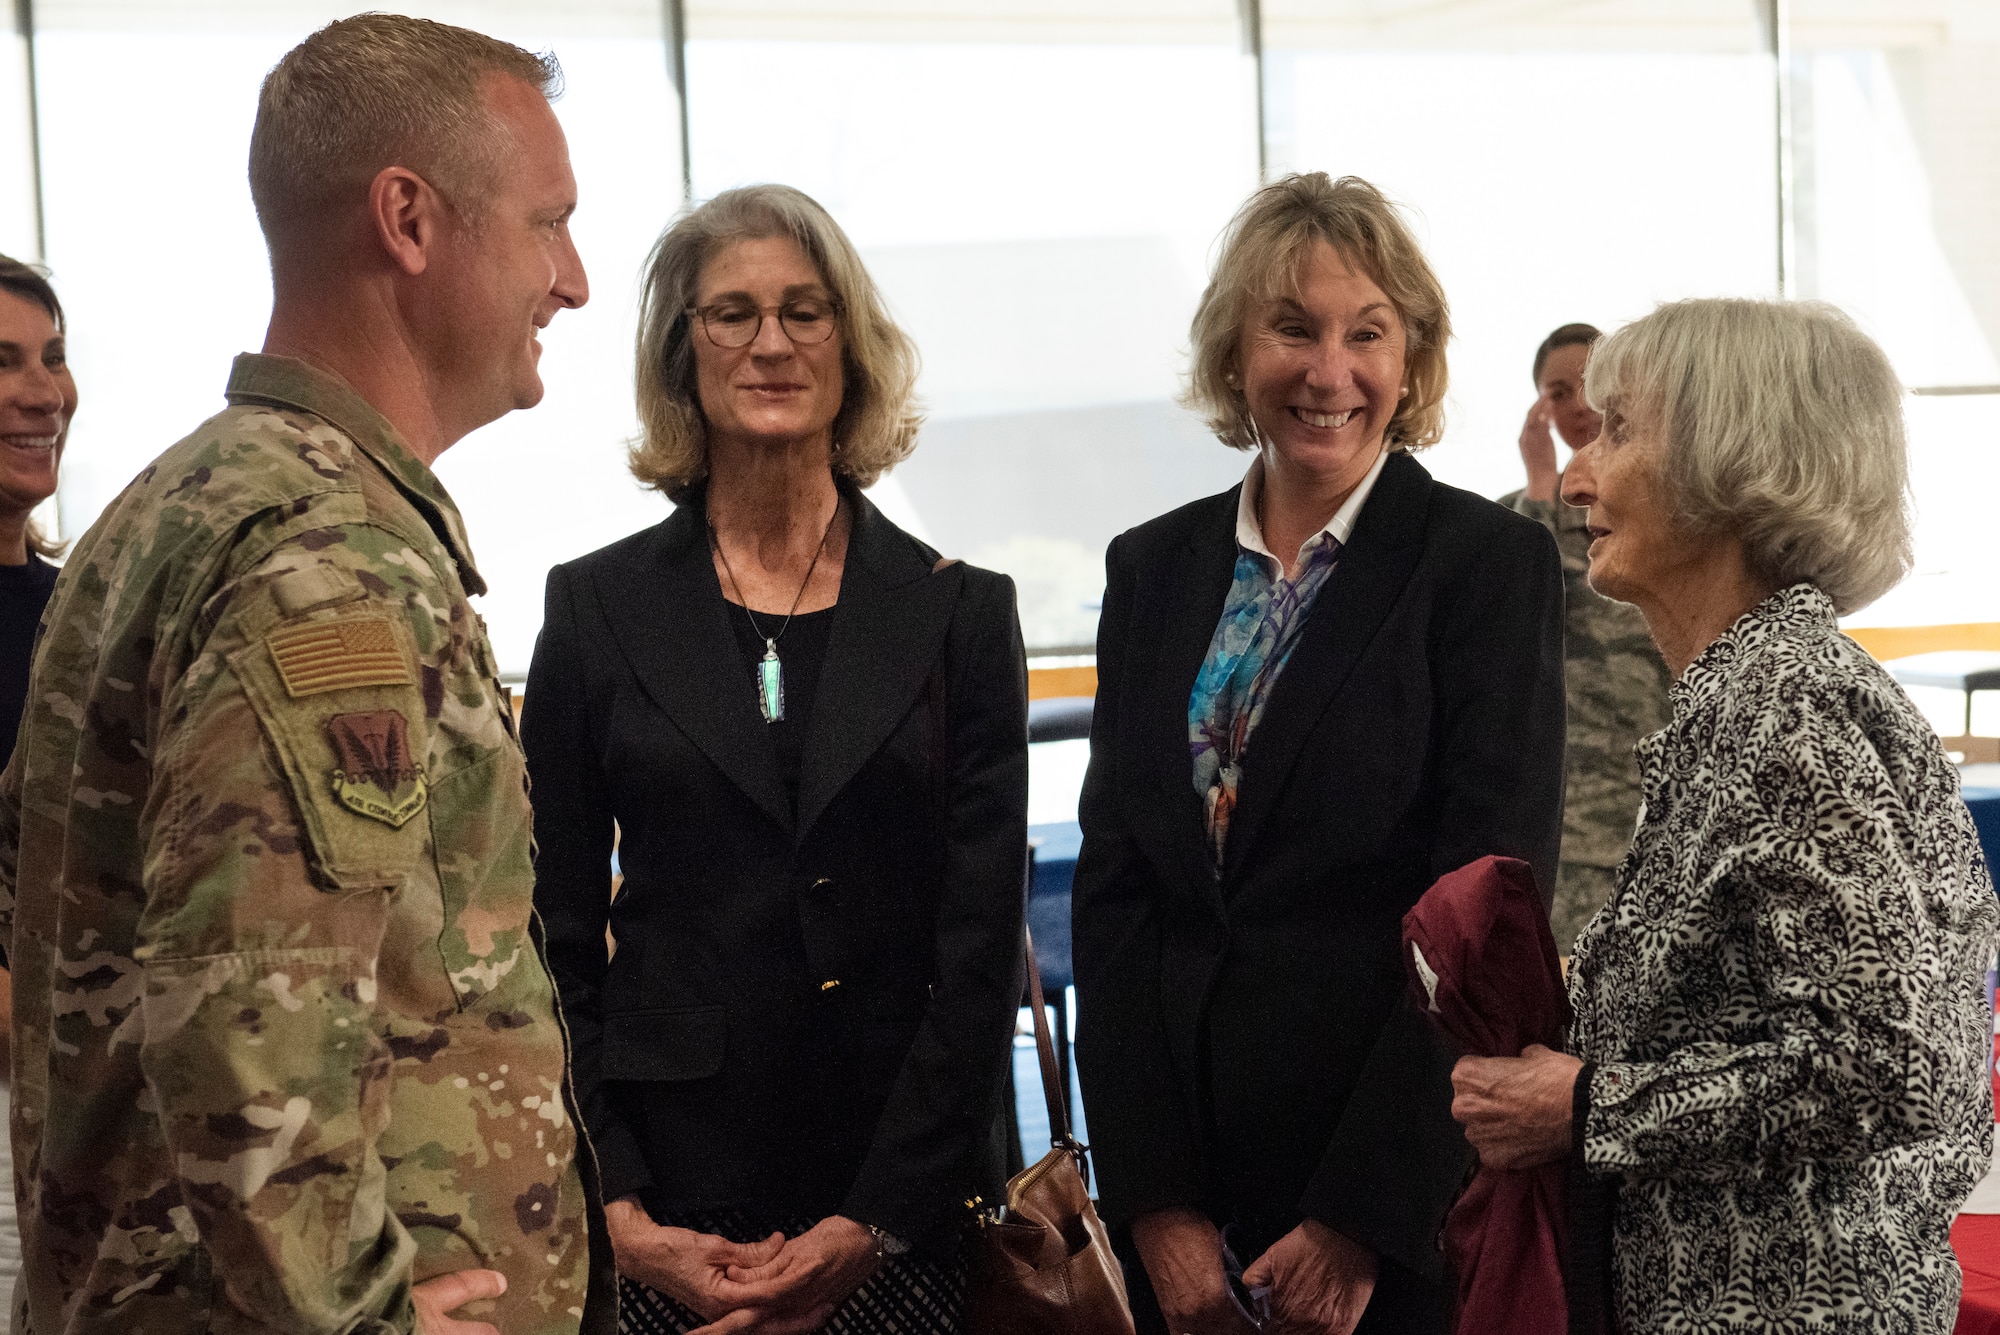 Col. Brian Laidlaw, 325th Fighter Wing commander, thanks Mary Tyndall Troff, daughter of World War I pilot Lt. Frank B. Tyndall, 2nd Bombardment Group, for visiting the base and meeting with the Airmen stationed here at Tyndall Air Force Base, Fla., Feb. 25, 2019. Mary and her daughters were invited to visit TAFB after she sent a letter about her concerns for the base and the well-being of Airmen after Hurricane Michael. (U.S. Air Force photo by Staff Sgt. Alexandre Montes)